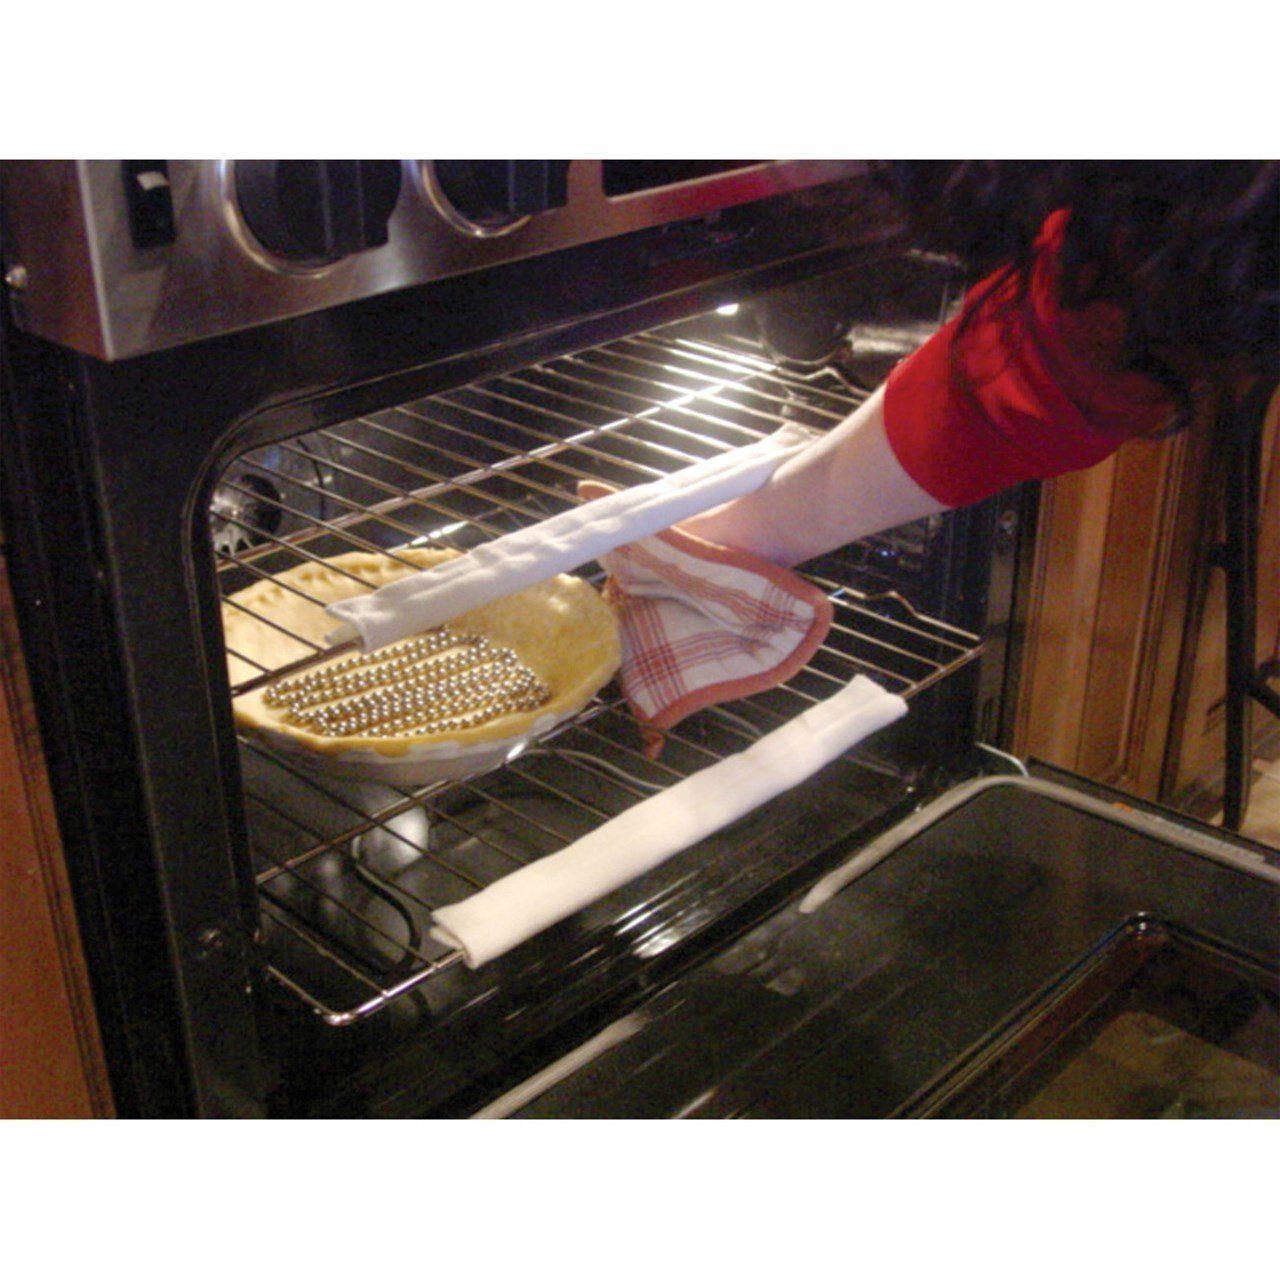 Cool Touch Oven Rack Guards- Package of 2 - The Low Vision Store